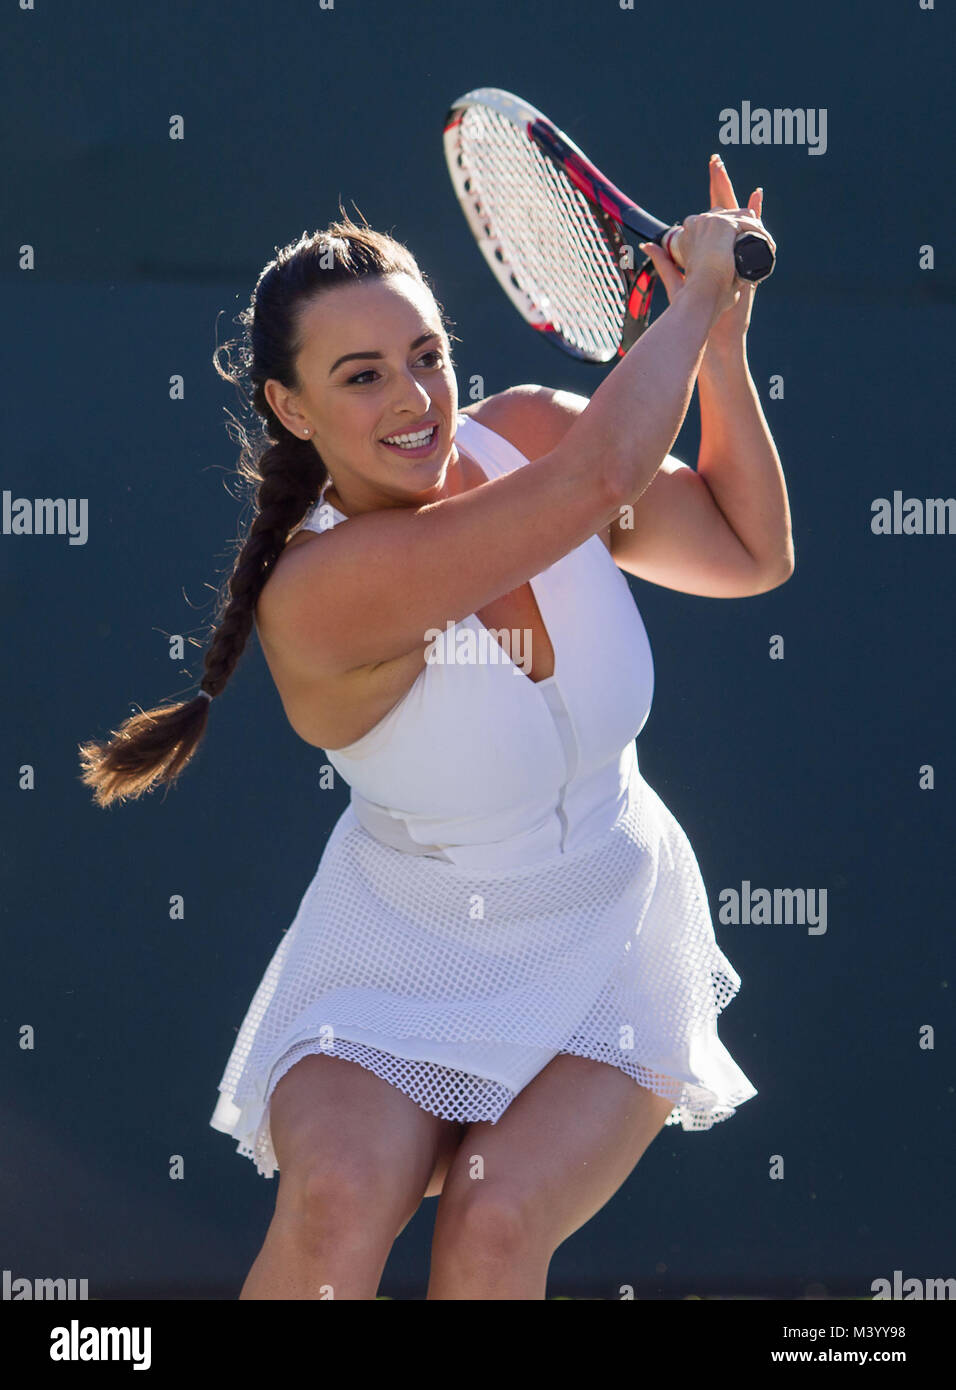 A young woman tennis player smiles after hitting a backhand on a tennis court in Beverly Hills, California. Photo by Francis Specker Stock Photo